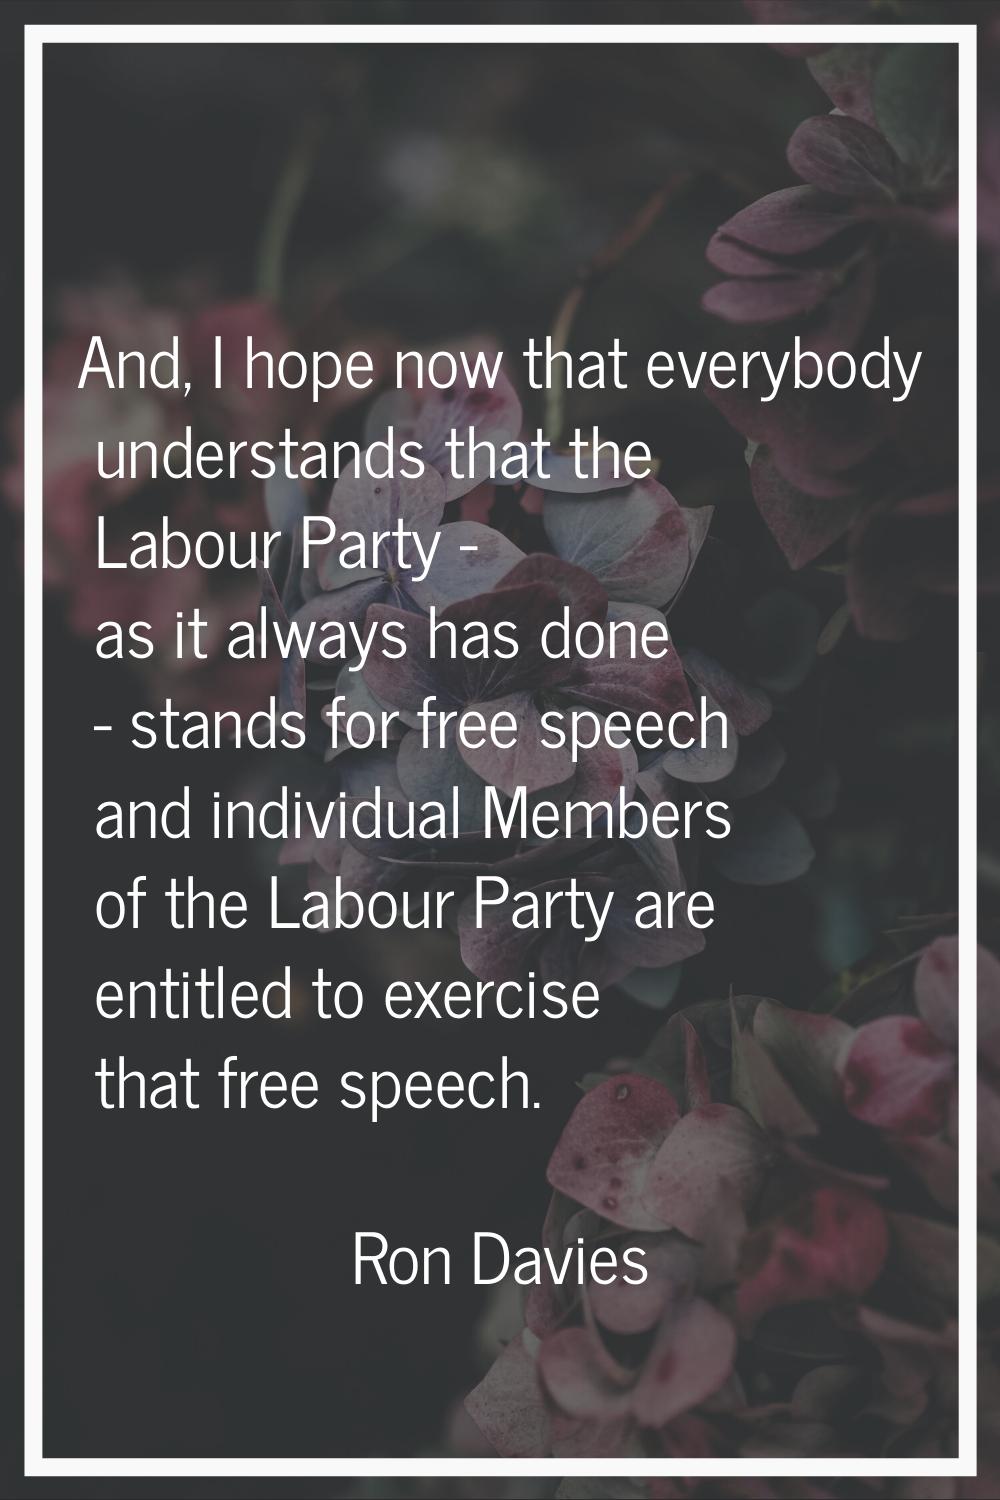 And, I hope now that everybody understands that the Labour Party - as it always has done - stands f